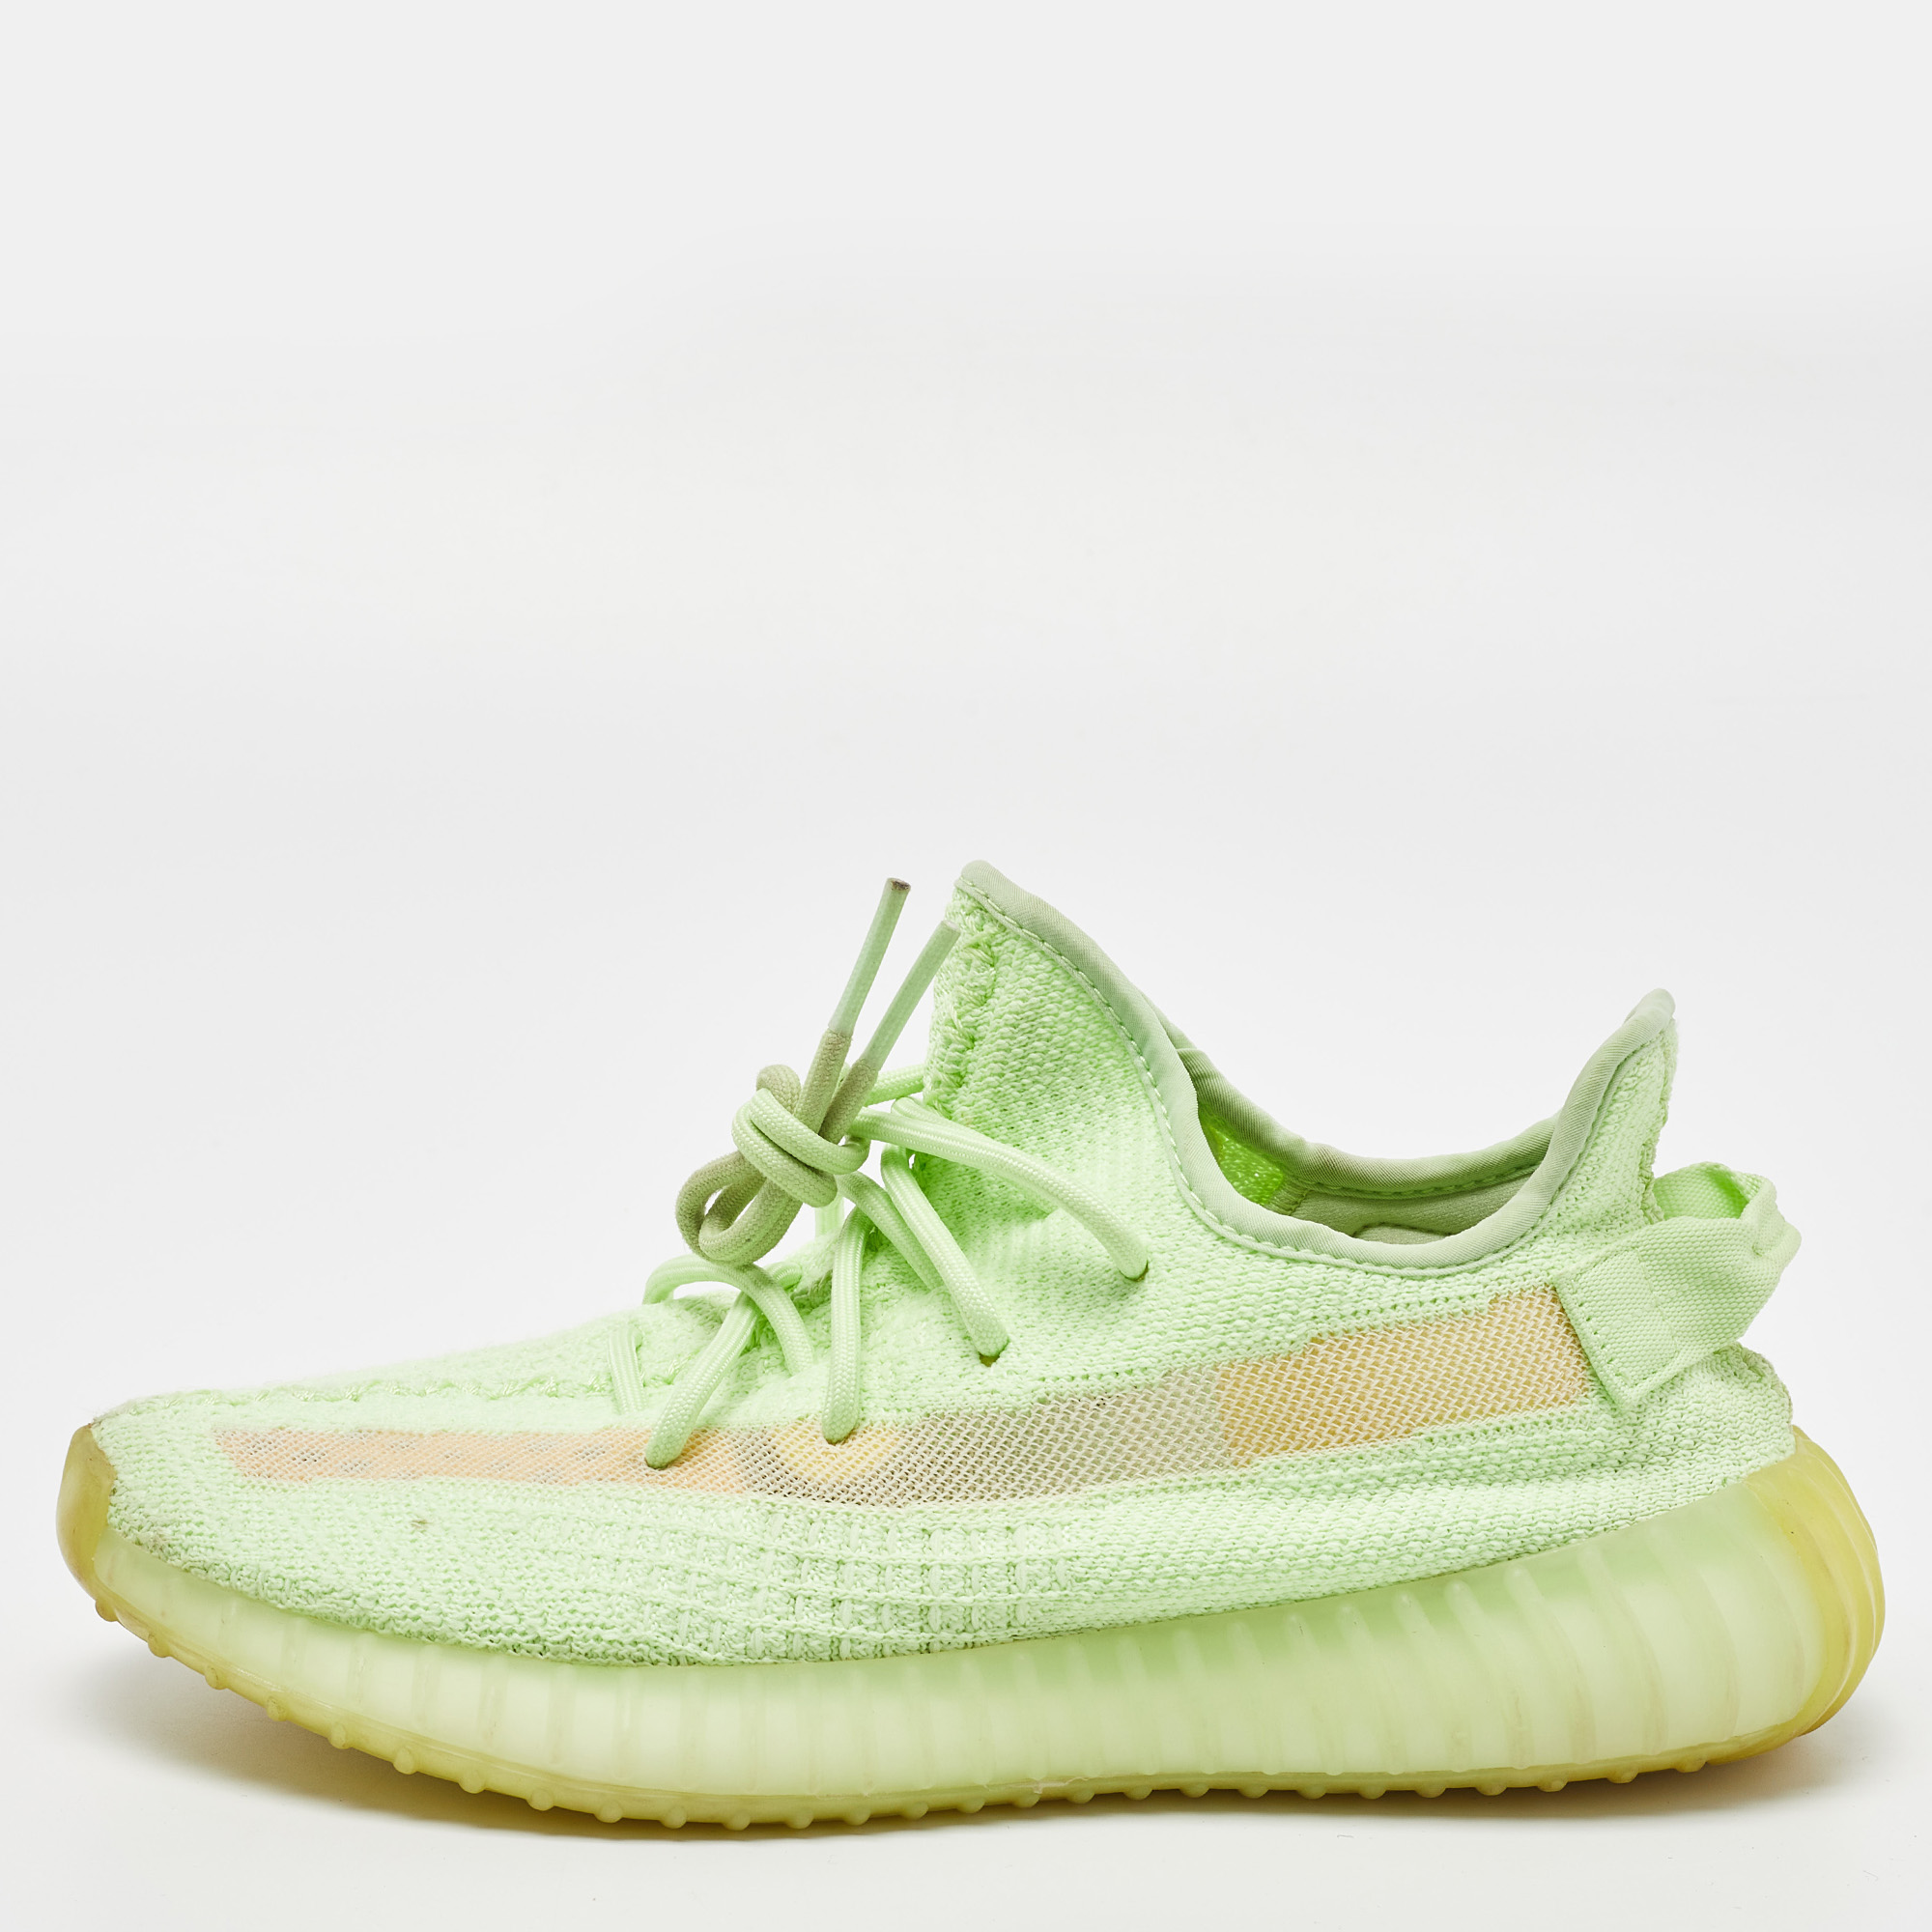 Pre-owned Yeezy X Adidas Green Knit Fabric Boost 350 V2 "gid' Glow Trainers Size 40 2/3